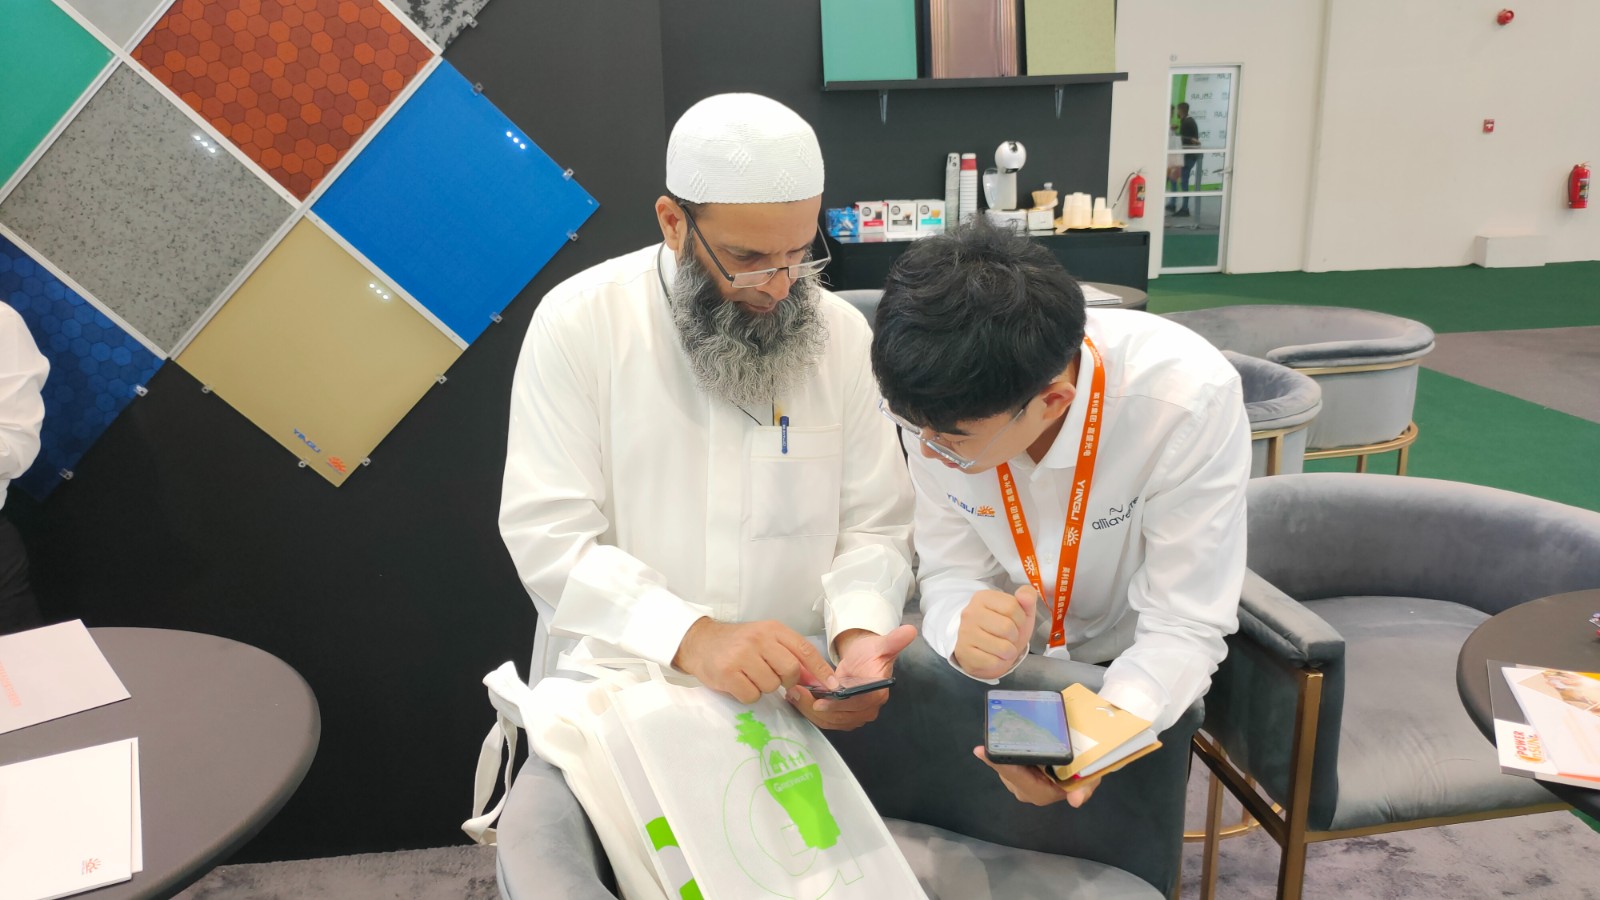 Yingli Gainsolar appeared at the 2023 Saudi Solar Energy Exhibition